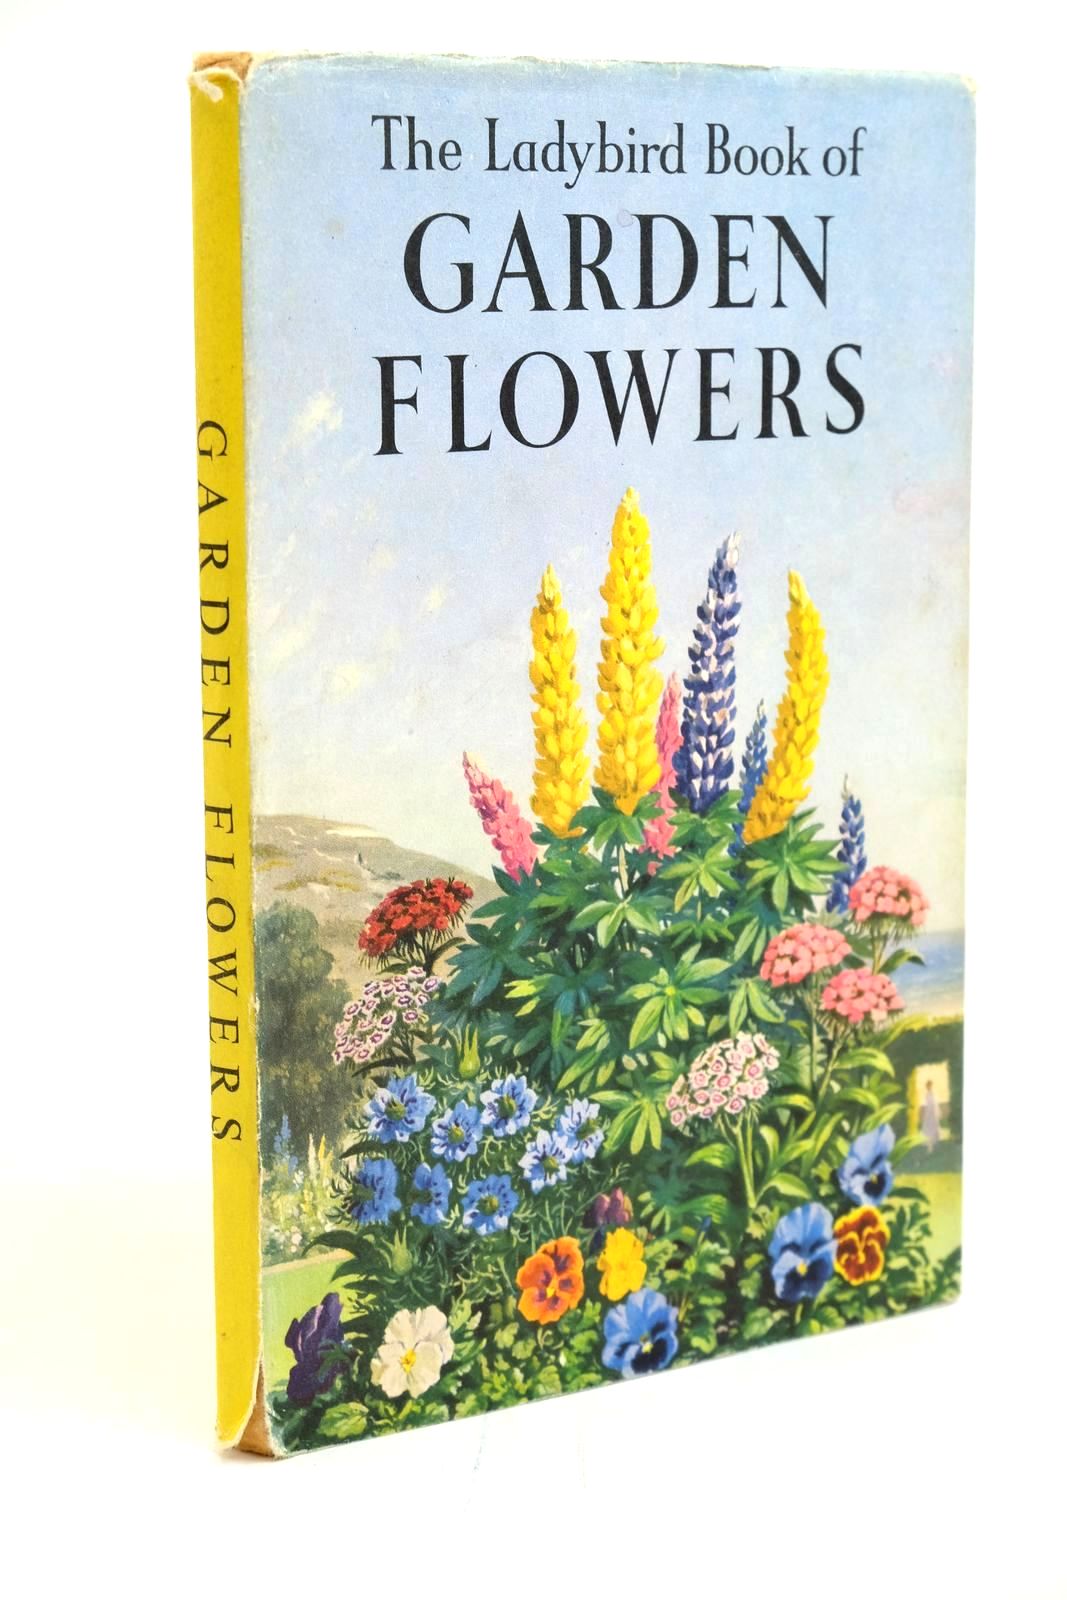 Photo of THE LADYBIRD BOOK OF GARDEN FLOWERS written by Vesey-Fitzgerald, Brian illustrated by Leigh-Pemberton, John published by Wills & Hepworth Ltd. (STOCK CODE: 1321426)  for sale by Stella & Rose's Books